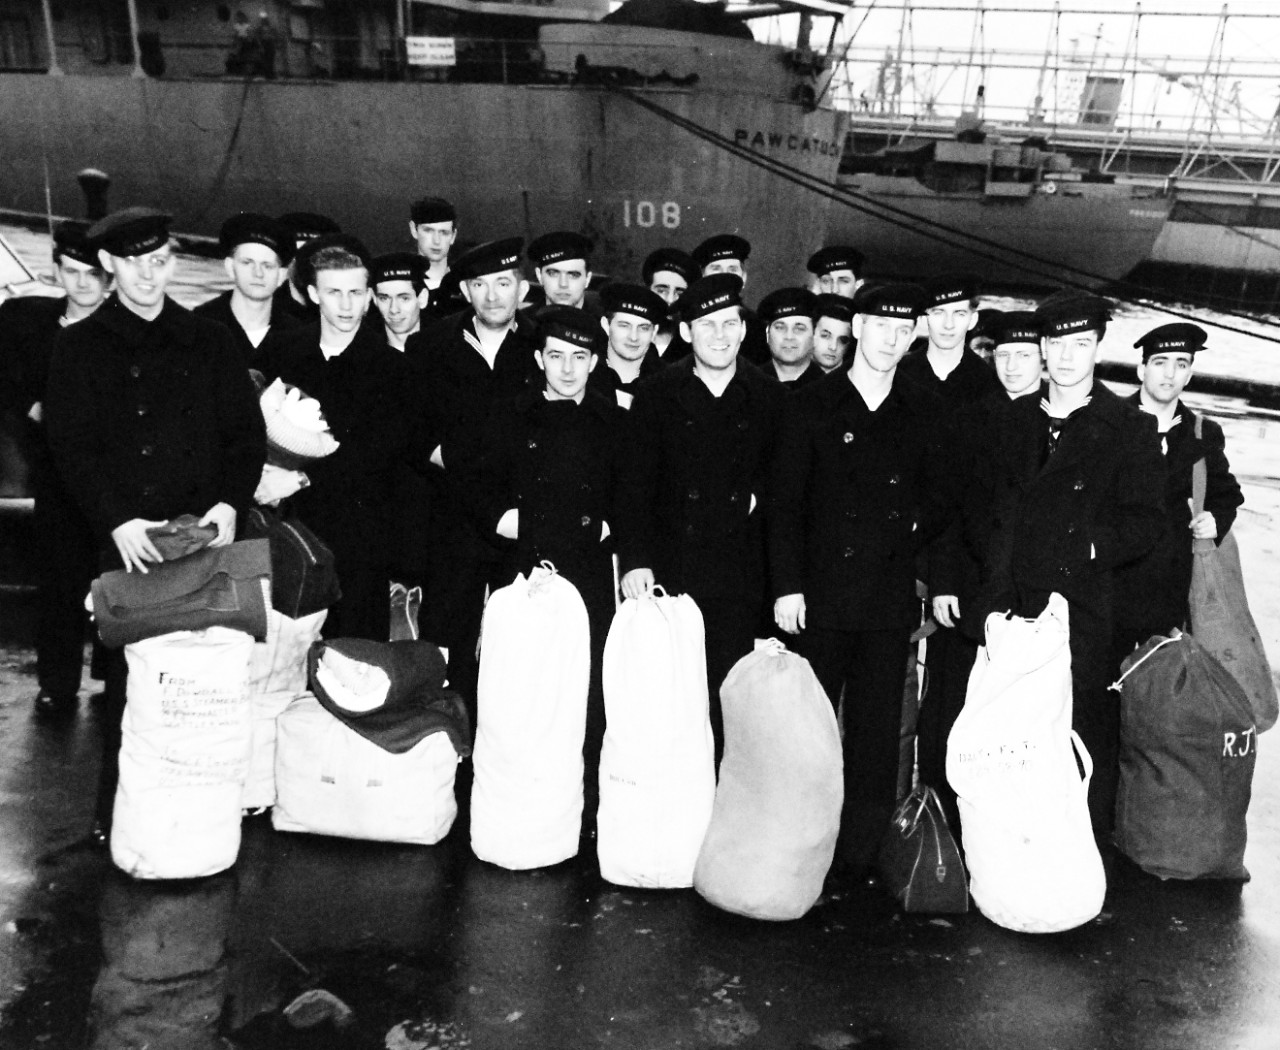 USS Leyte (CV-32), 1949.     U.S. Naval Reserves ready to board the carrier at Norfolk, Virginia, for fleet maneuvers.   Note, USS Pawcatuck (AO-108) behind the Reservists.    Photograph released February 20, 1949.   Official U.S. Navy photograph, now in the collections of the National Archives.  (2016/11/15).